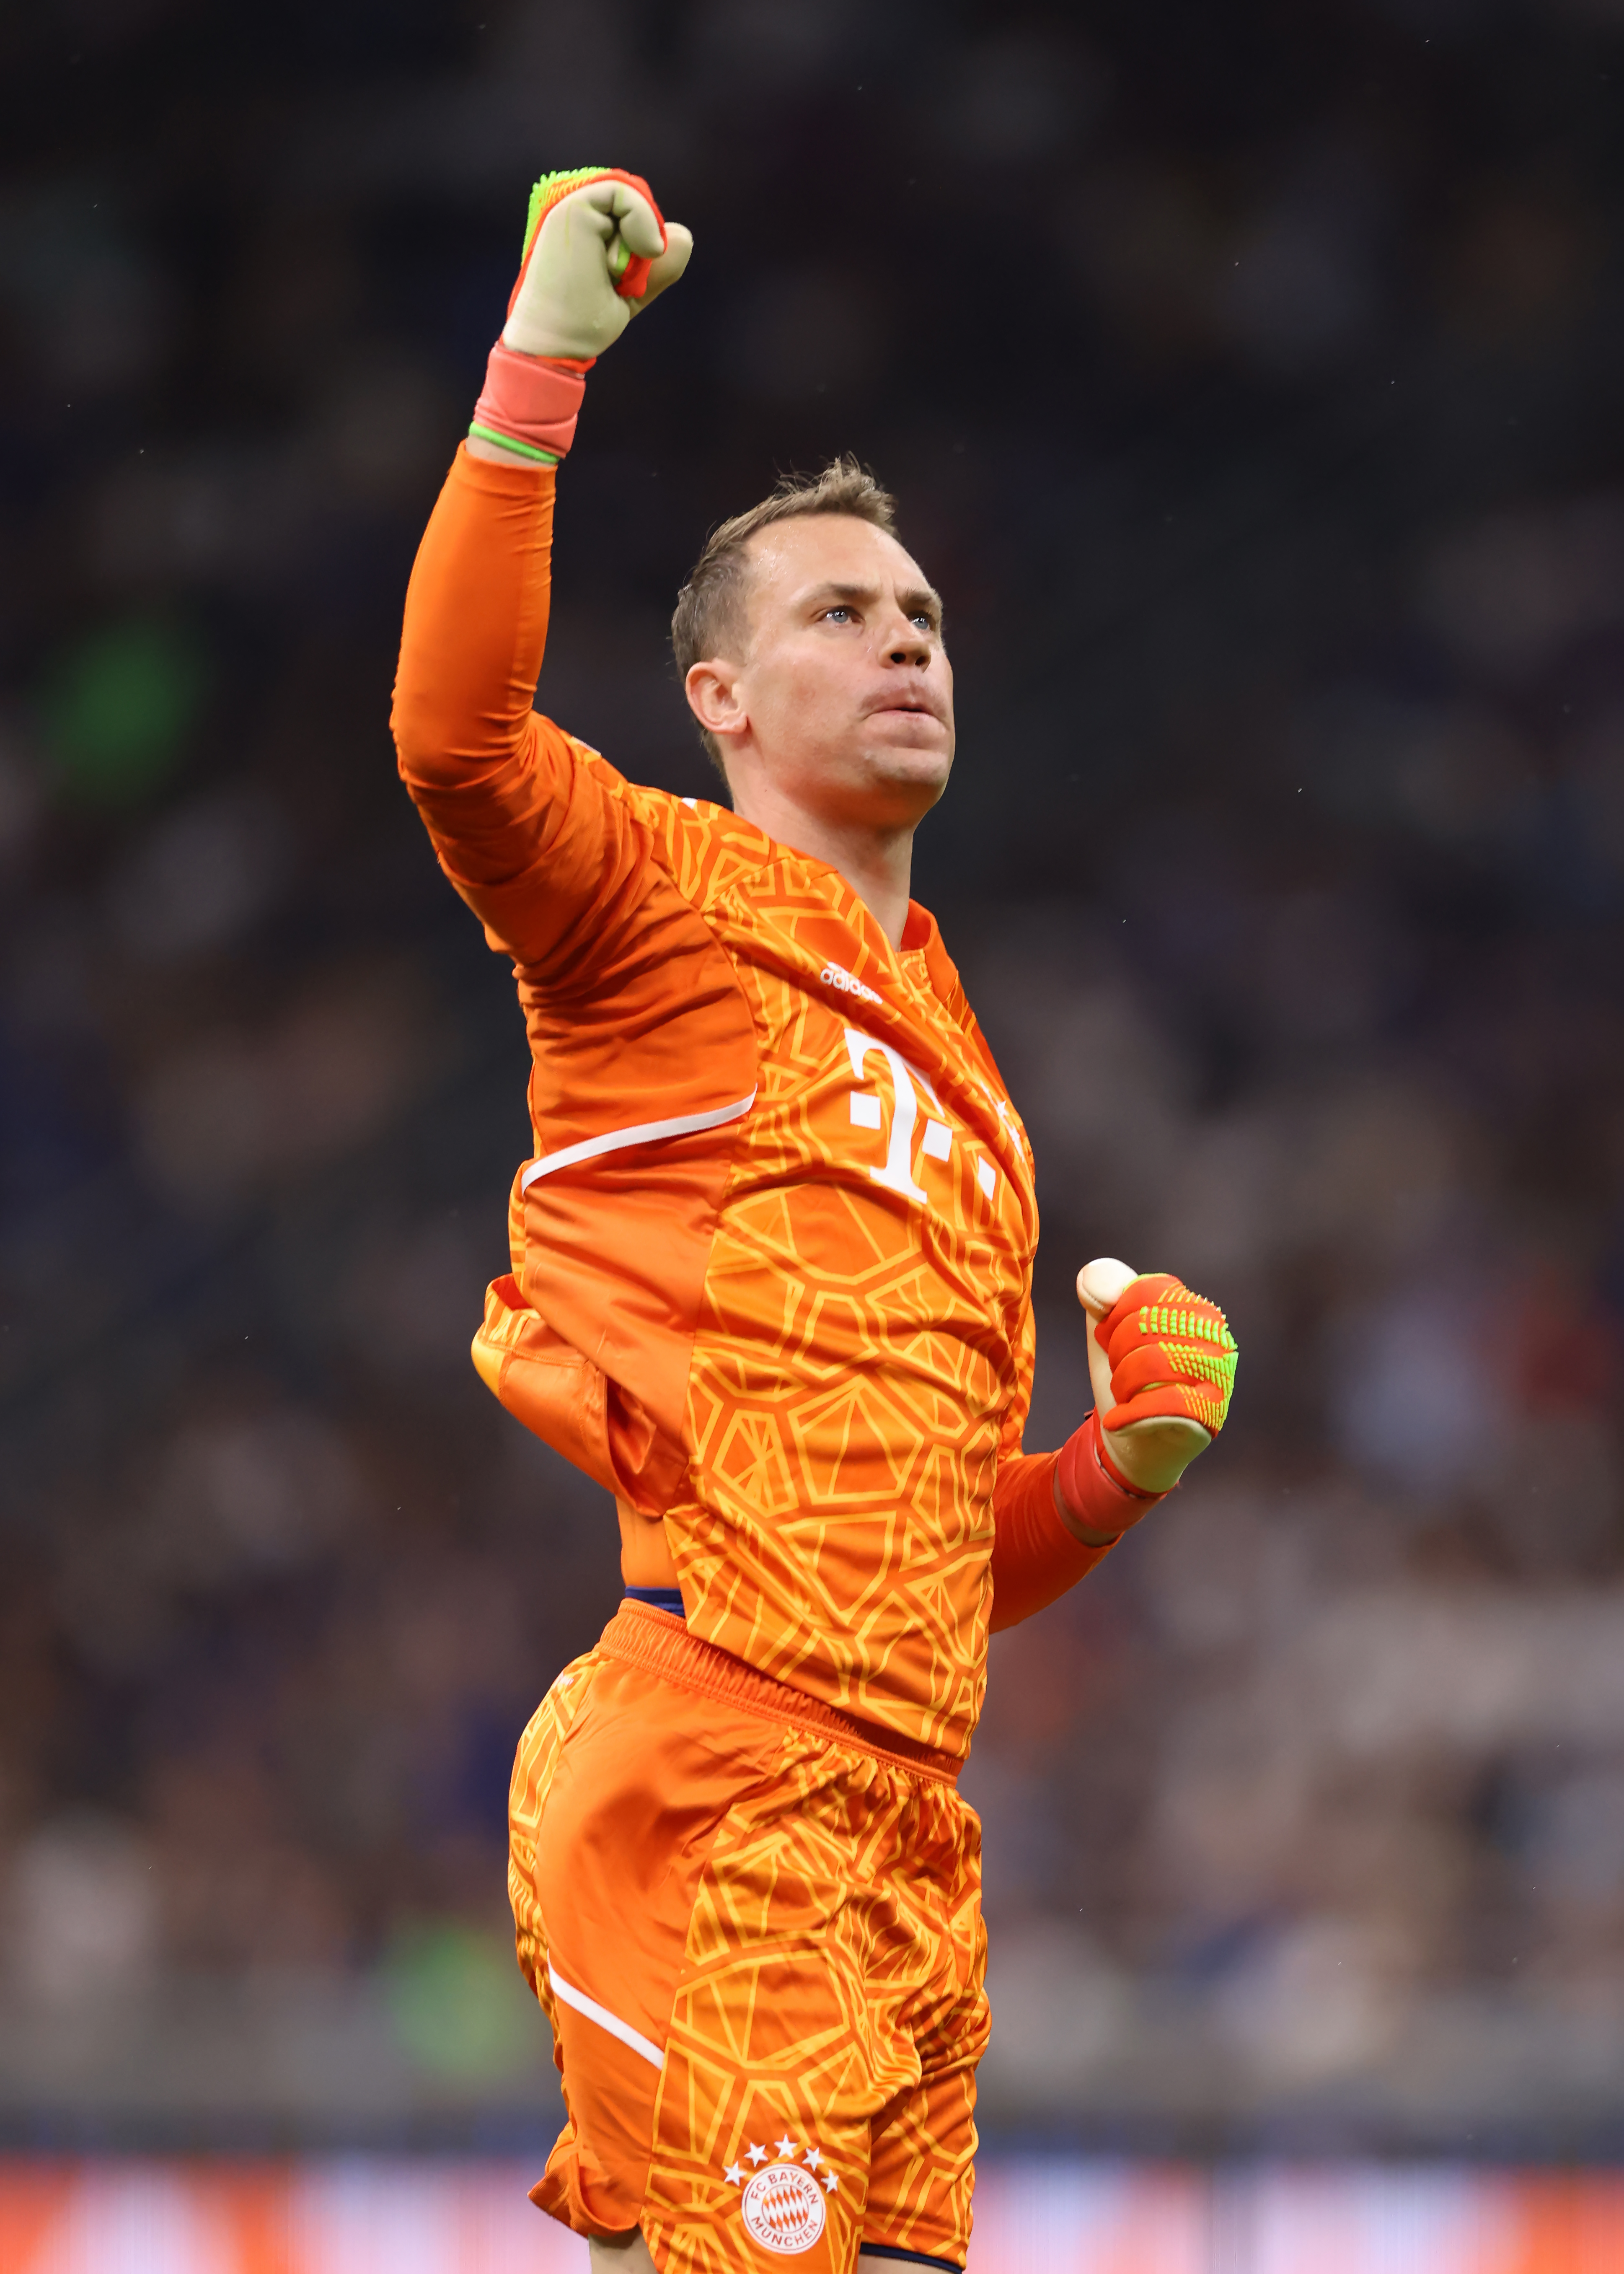 Manuel Neuer pumps his fists in celebration after Leroy Sané’s opening goal.